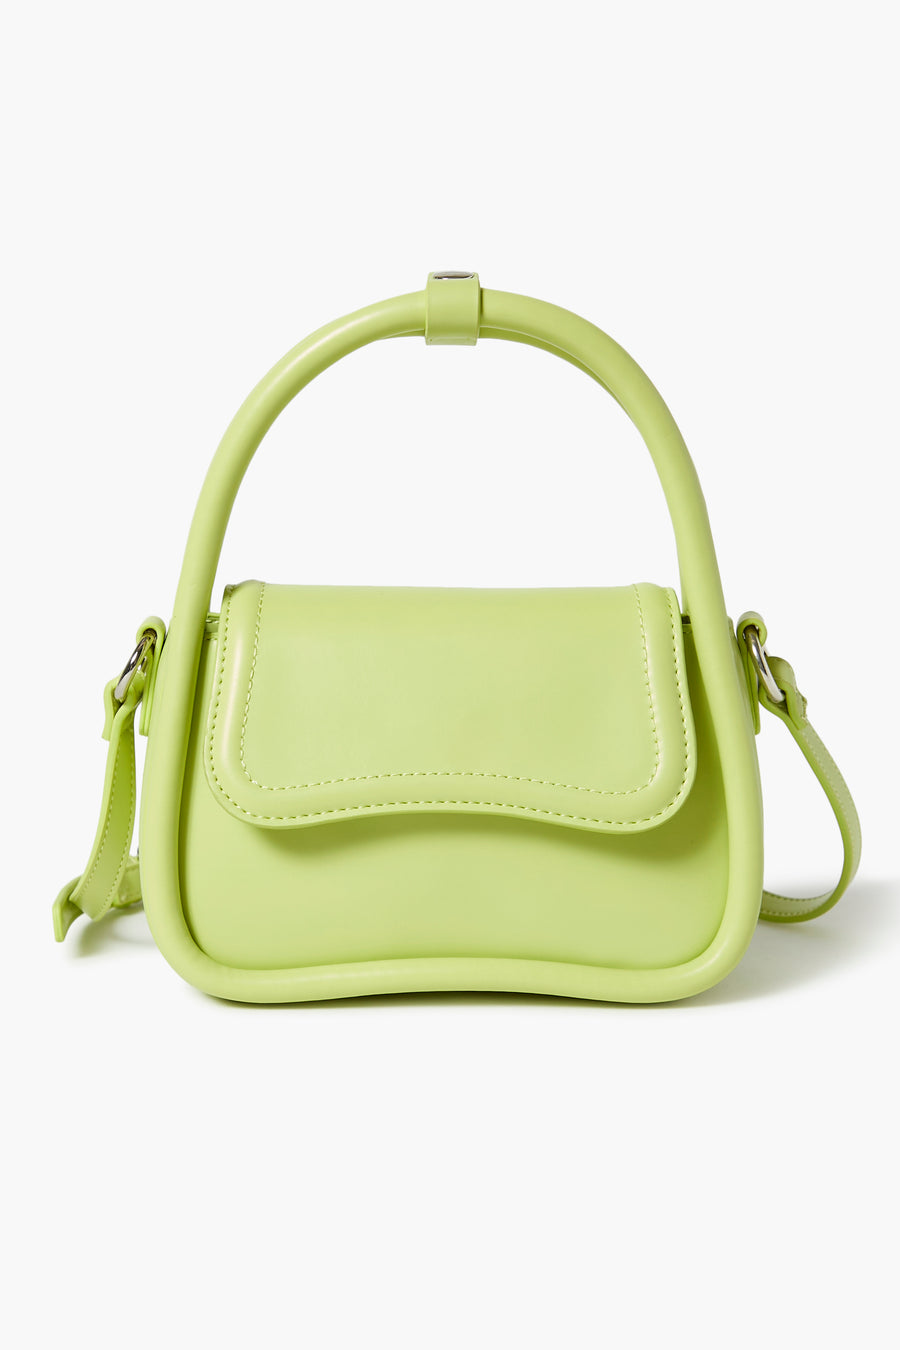 7 Backpacks for Women That Will Make You Rethink Your Go-To Bag - F21